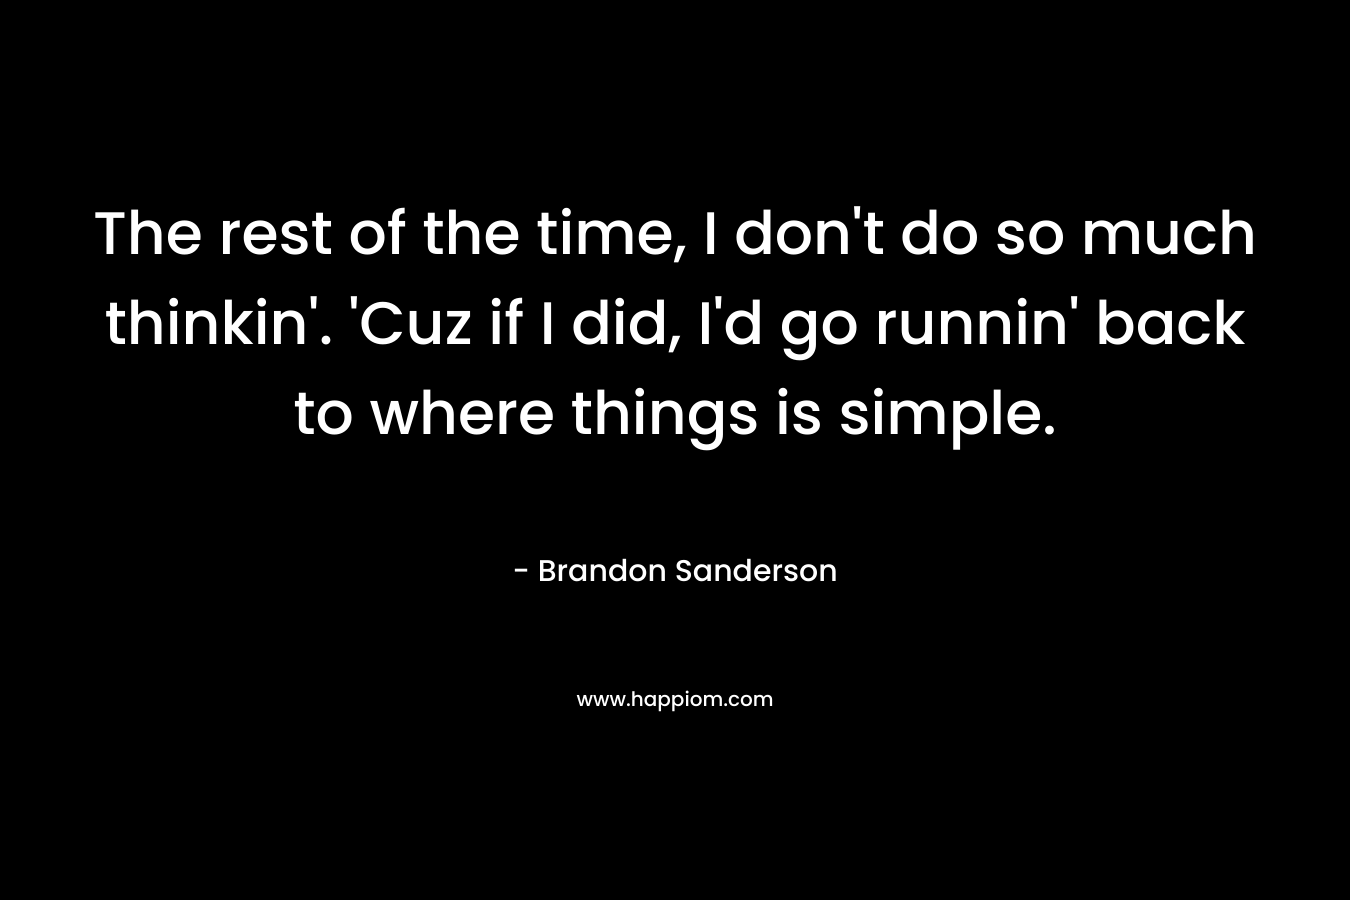 The rest of the time, I don’t do so much thinkin’. ‘Cuz if I did, I’d go runnin’ back to where things is simple. – Brandon Sanderson